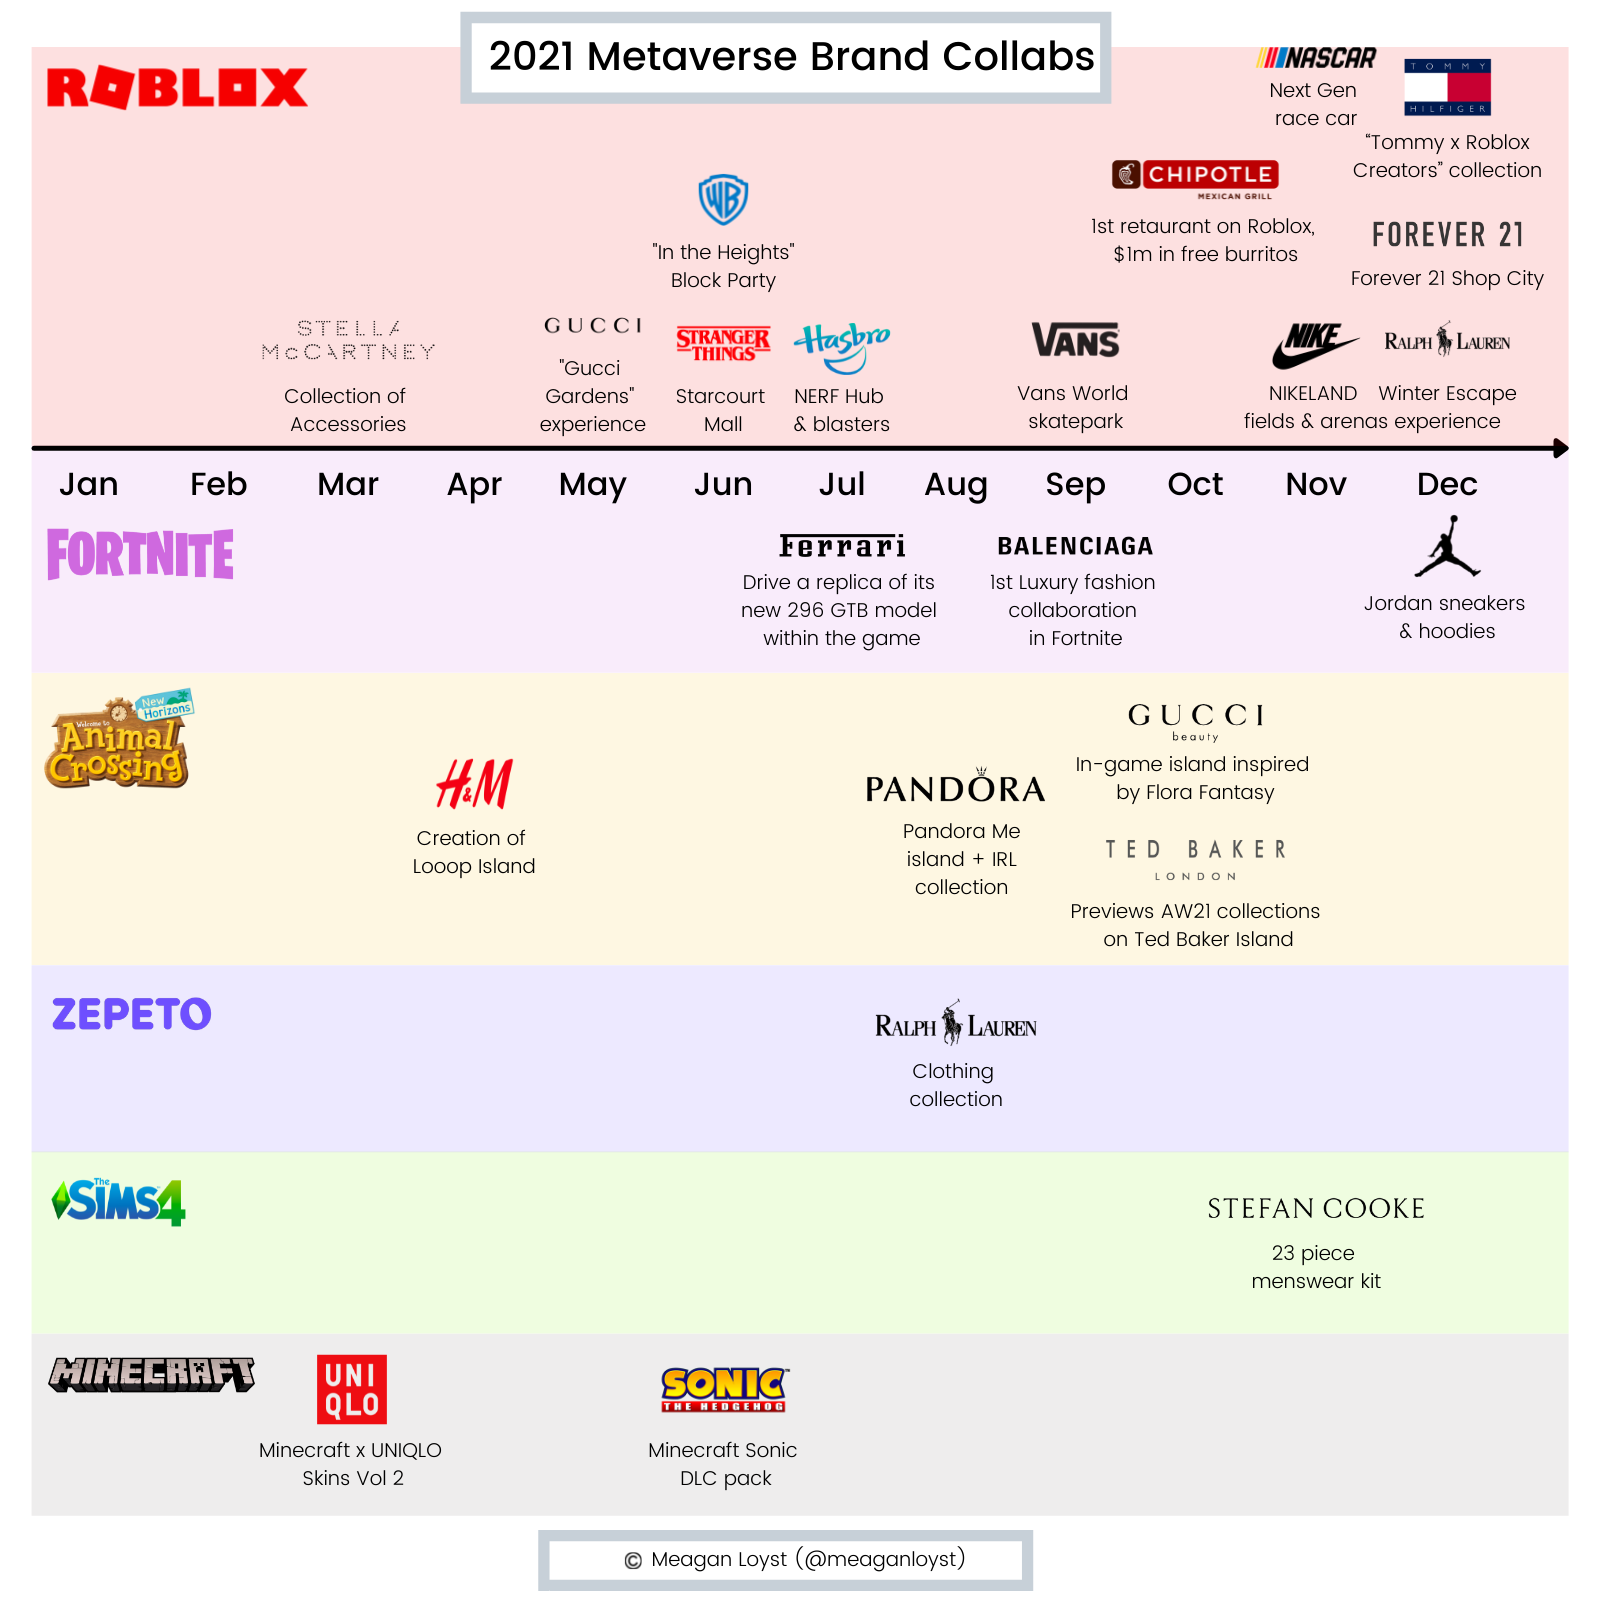 Prominent brand collaborations of 2021 across major metaverse platforms